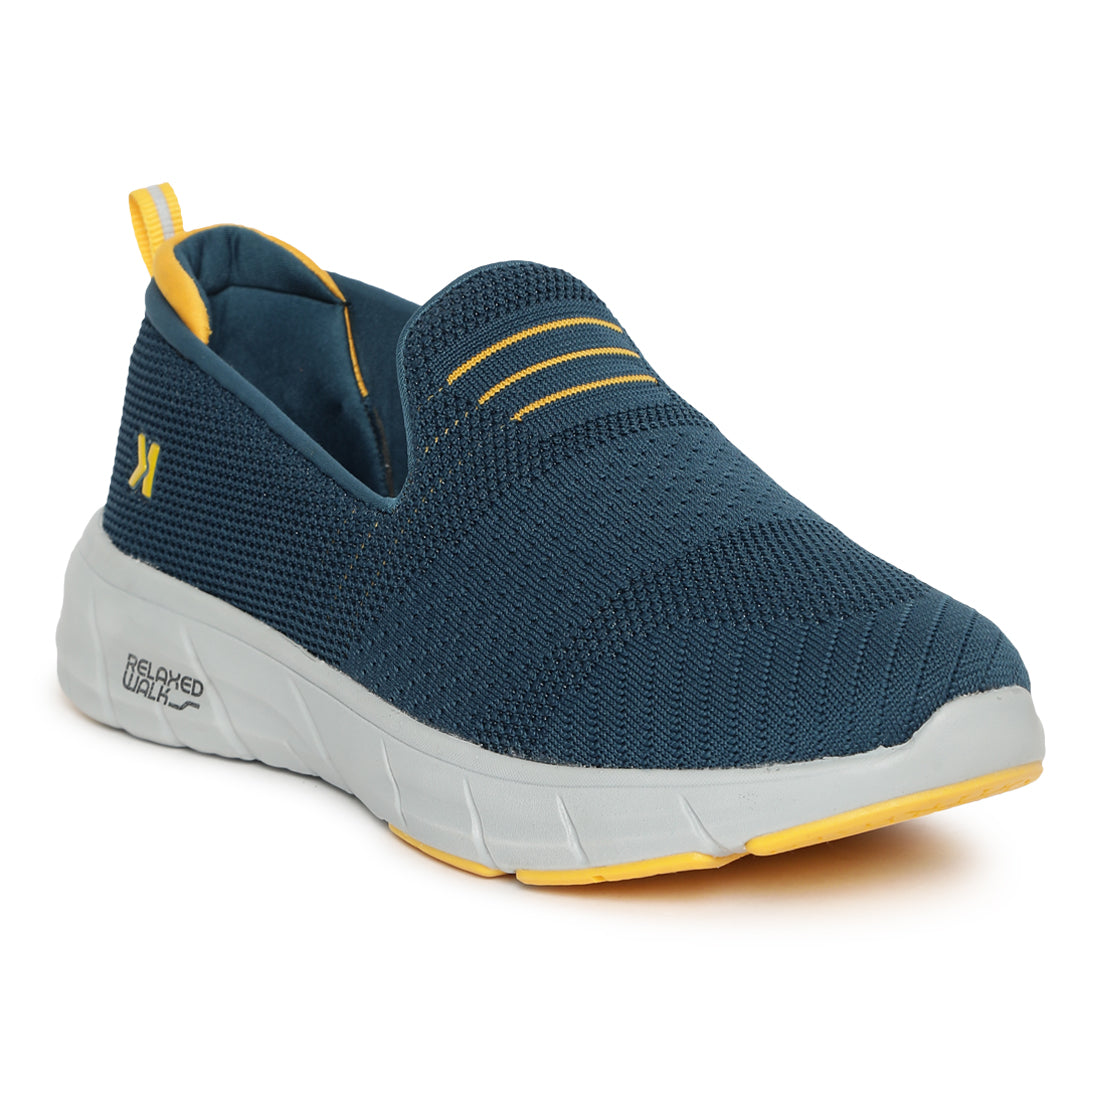 Eeken Teal Blue - Yellow Athleisure Shoes for Men